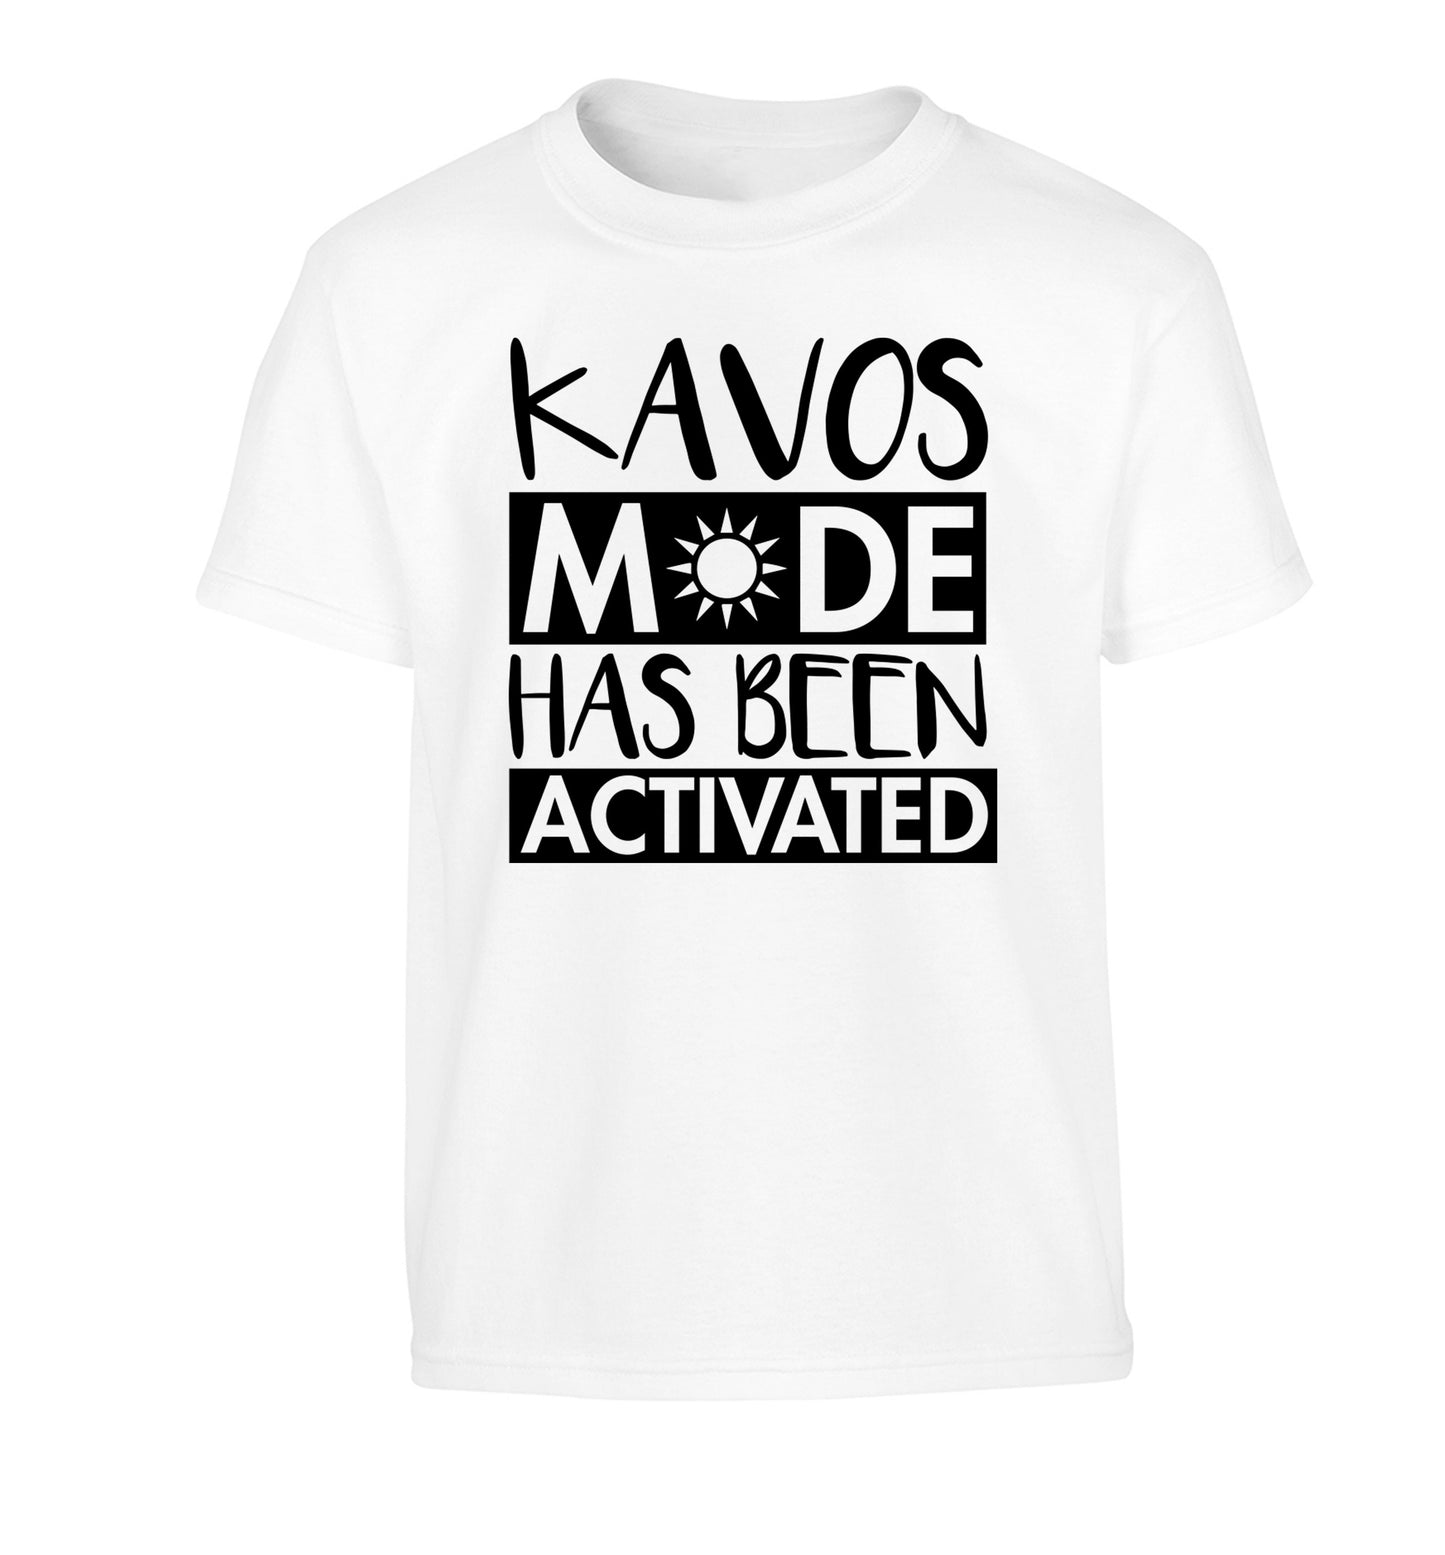 Kavos mode has been activated Children's white Tshirt 12-14 Years